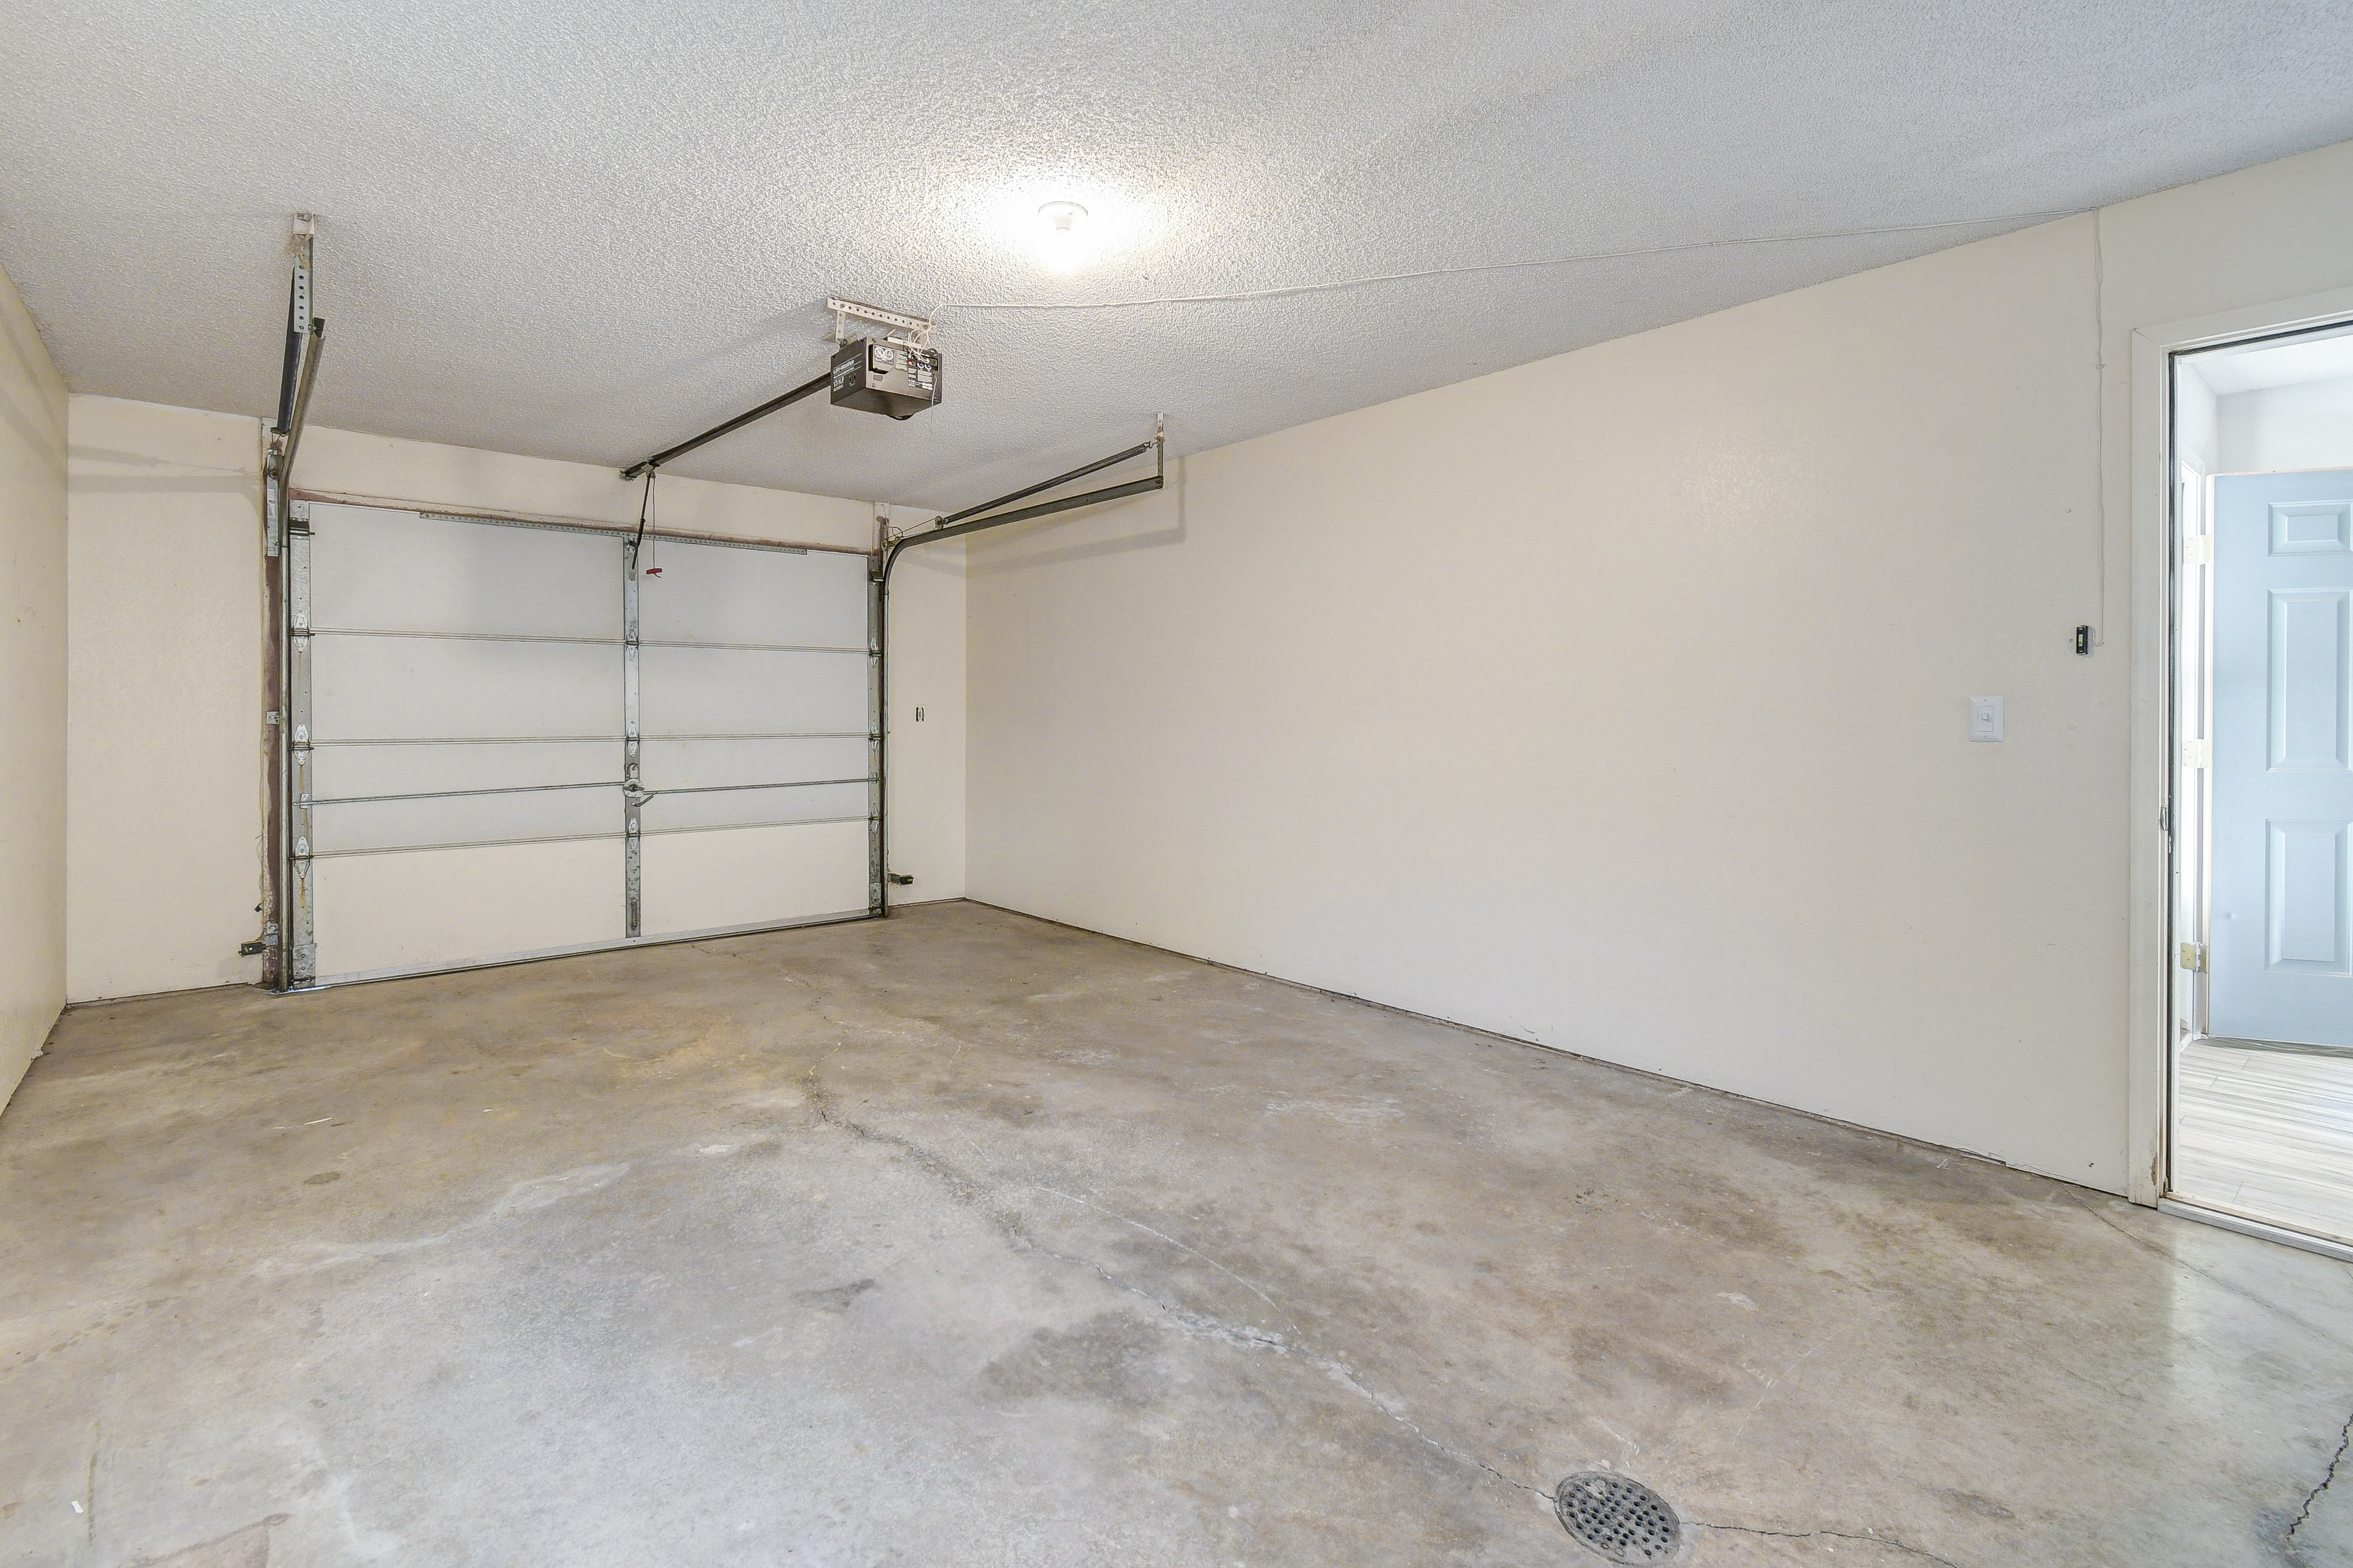 Townhome empty garage interior at The Arbor in Blue Springs, Missouri